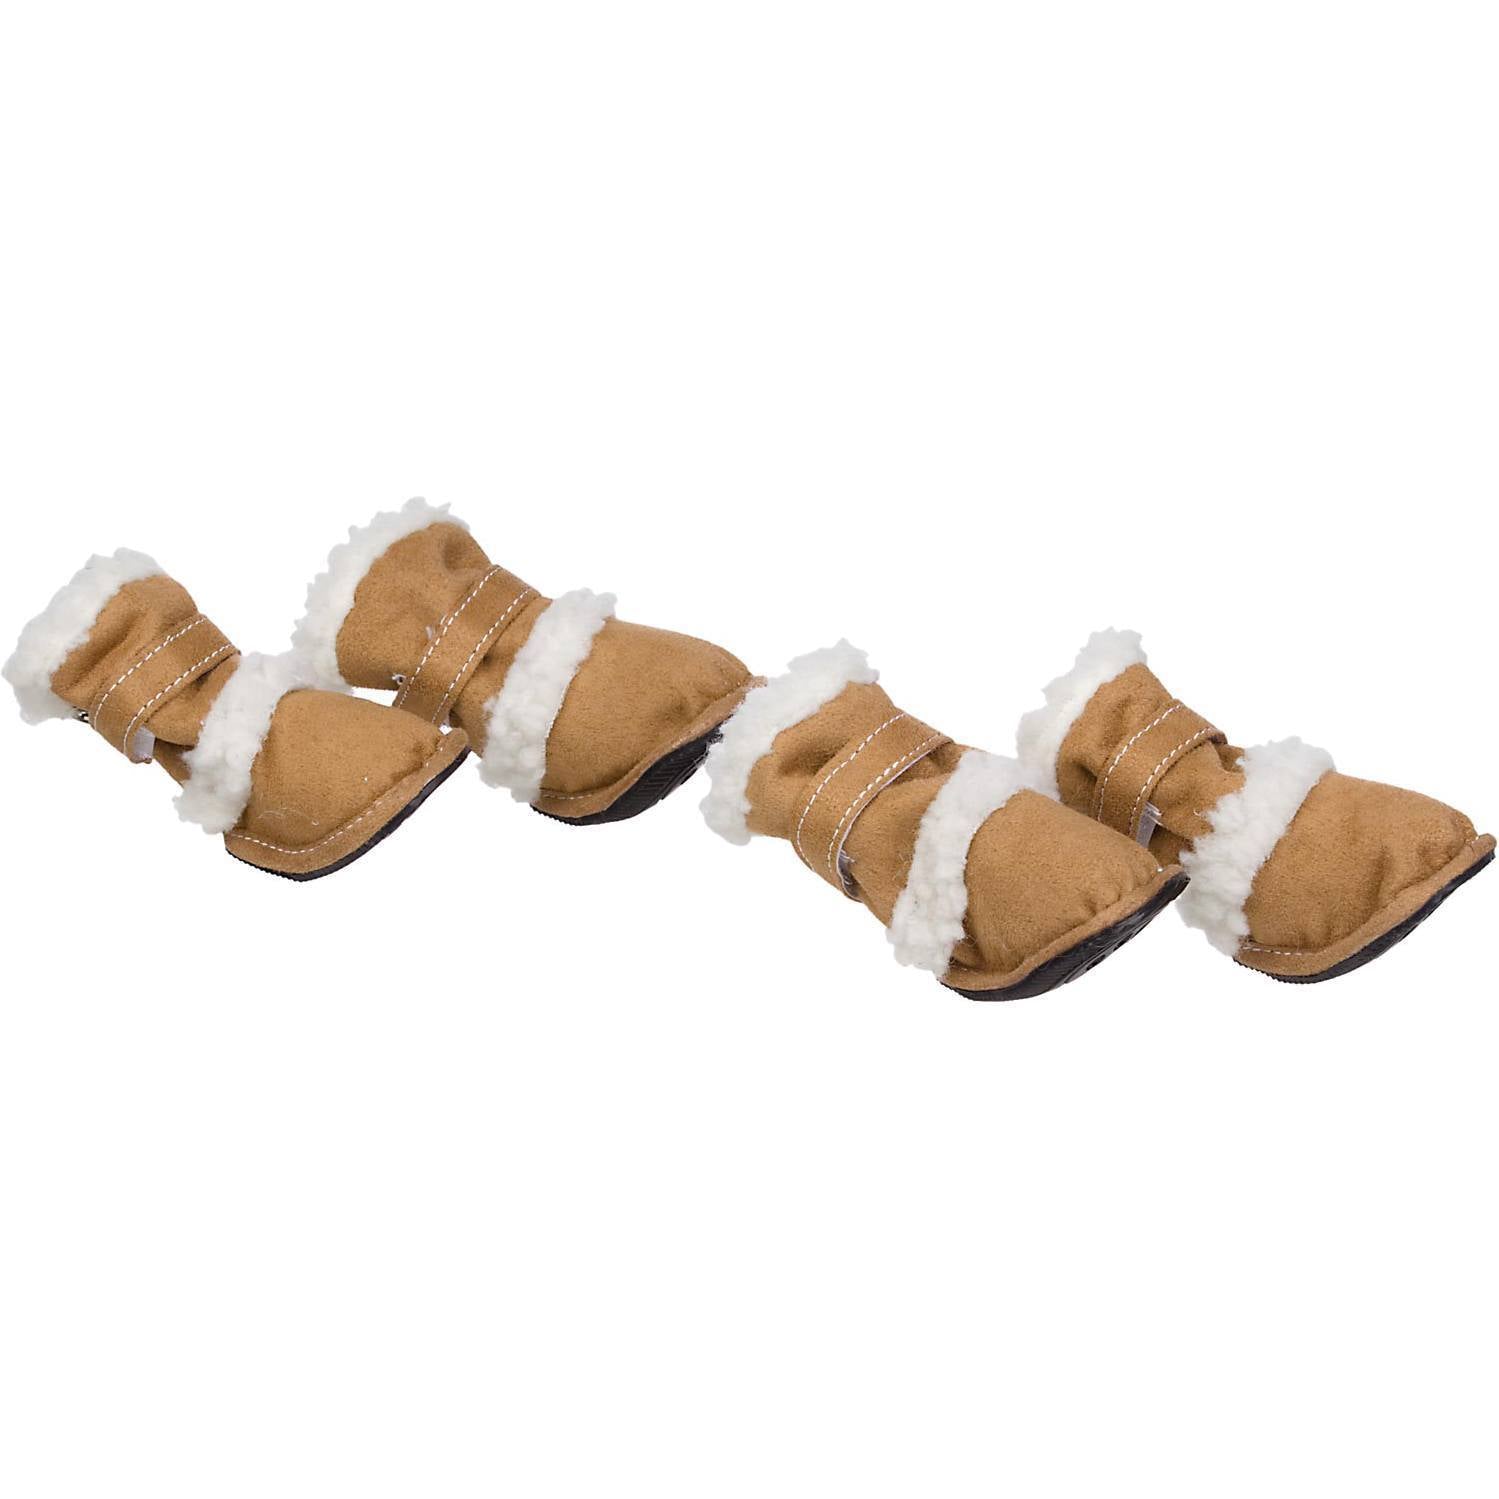 Pet Life ® 'Duggz' 3M Insulated Winter Fashion Dog Shoes Booties - Set of 4 X-Small Brown & White